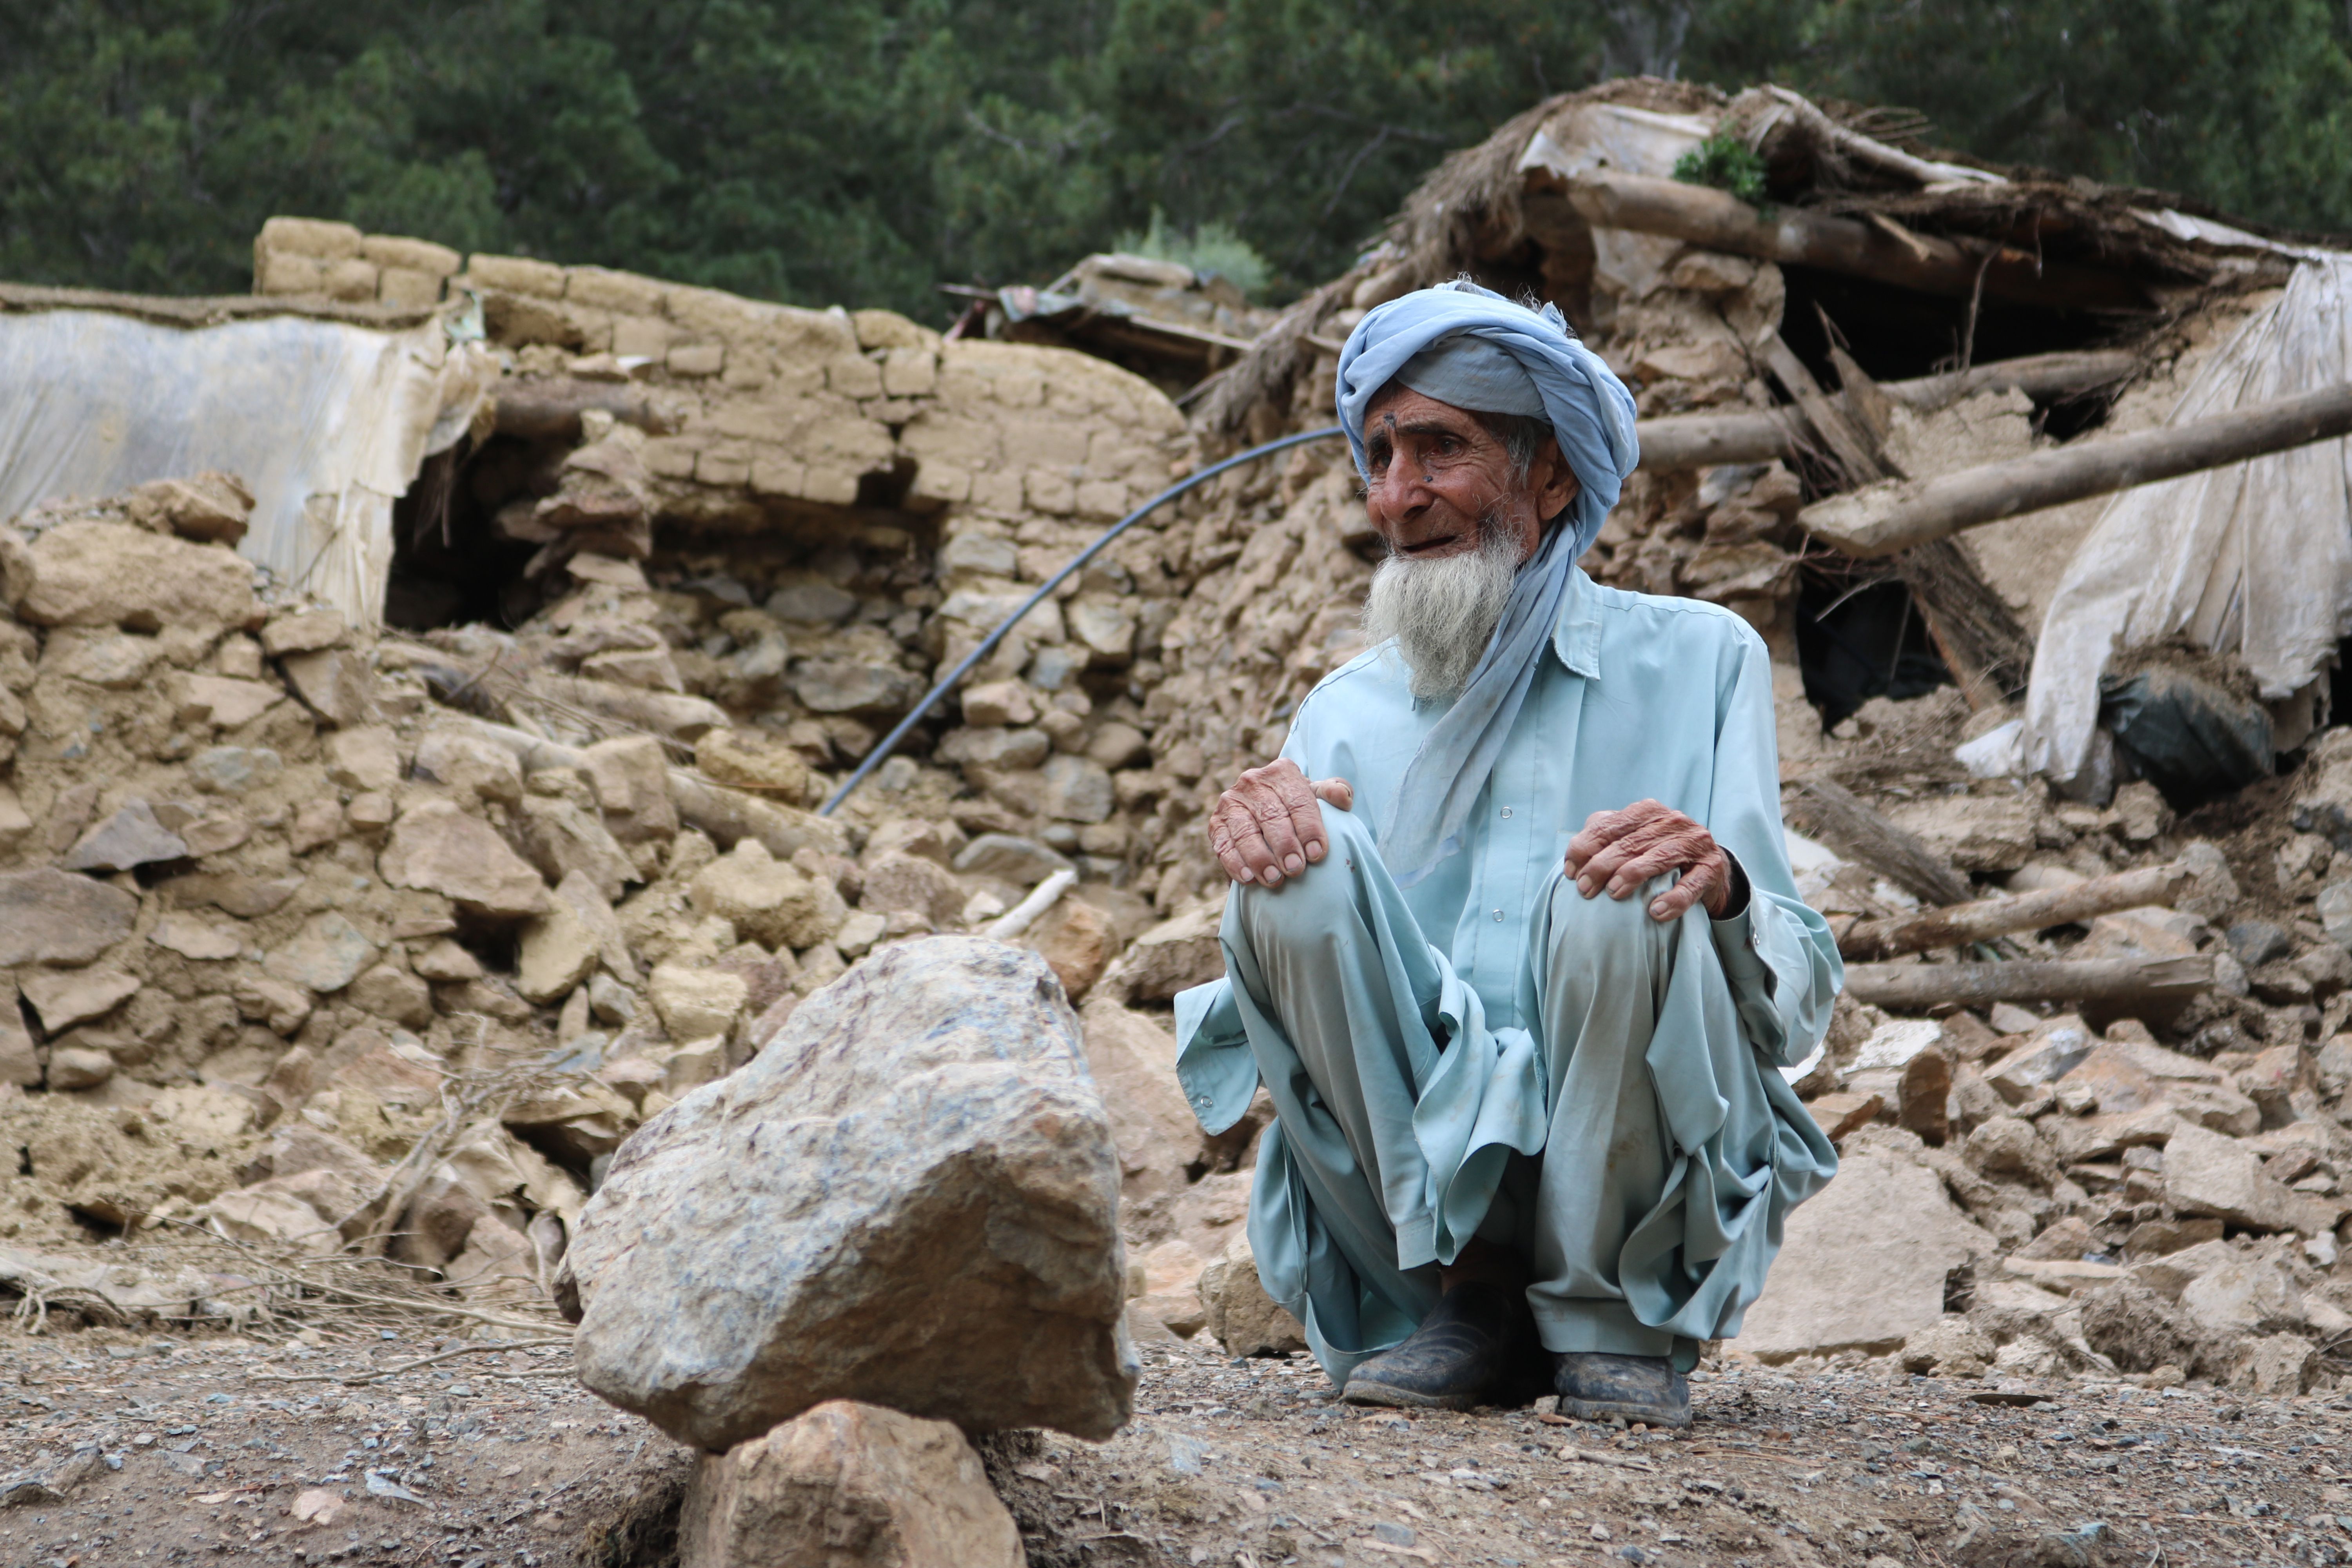 An older man sitting in rubble looking at the destruction of an earthquake. 